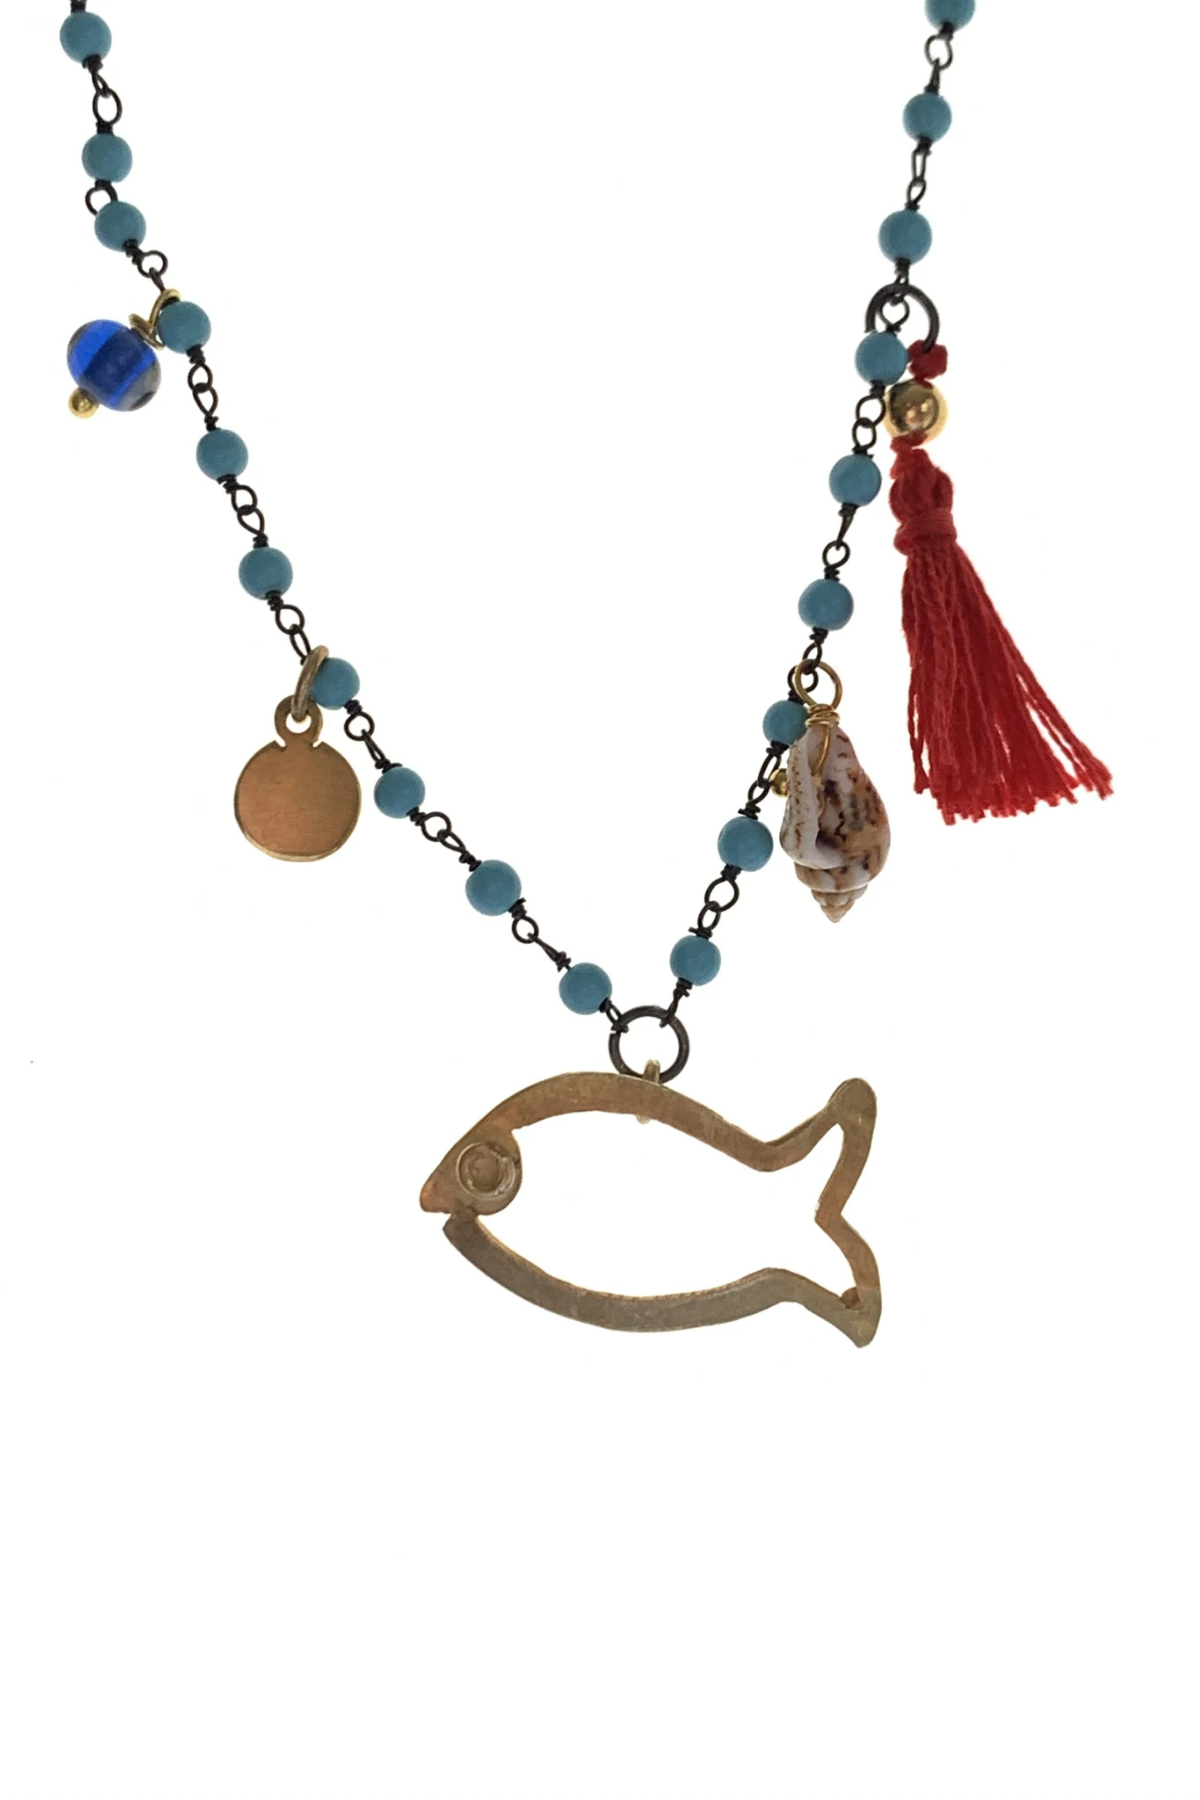 Fish turquoise necklace